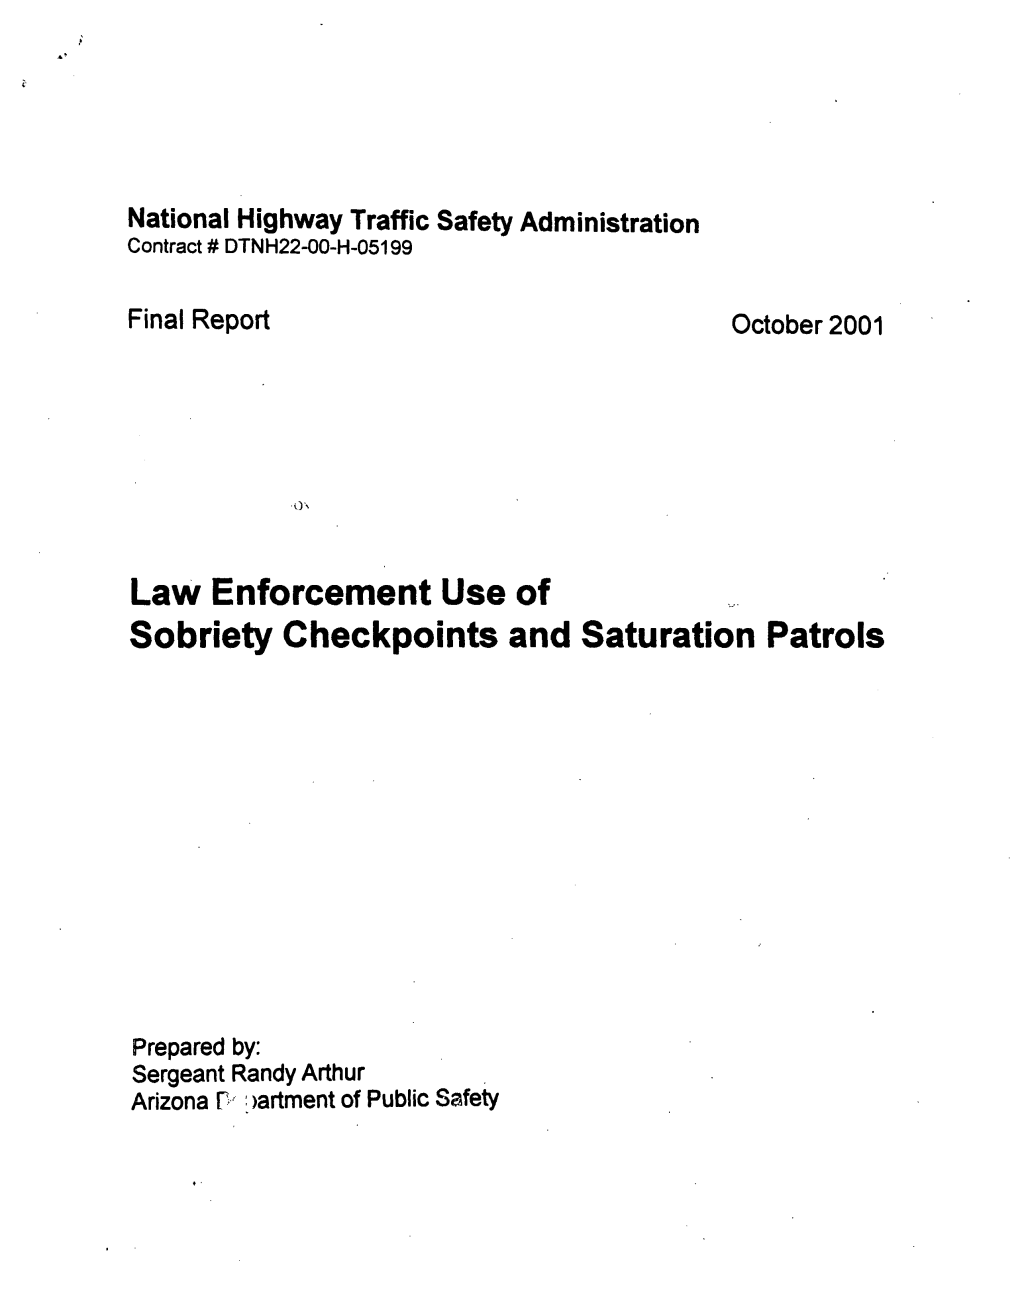 Sobriety Checkpoints and Saturation Patrols